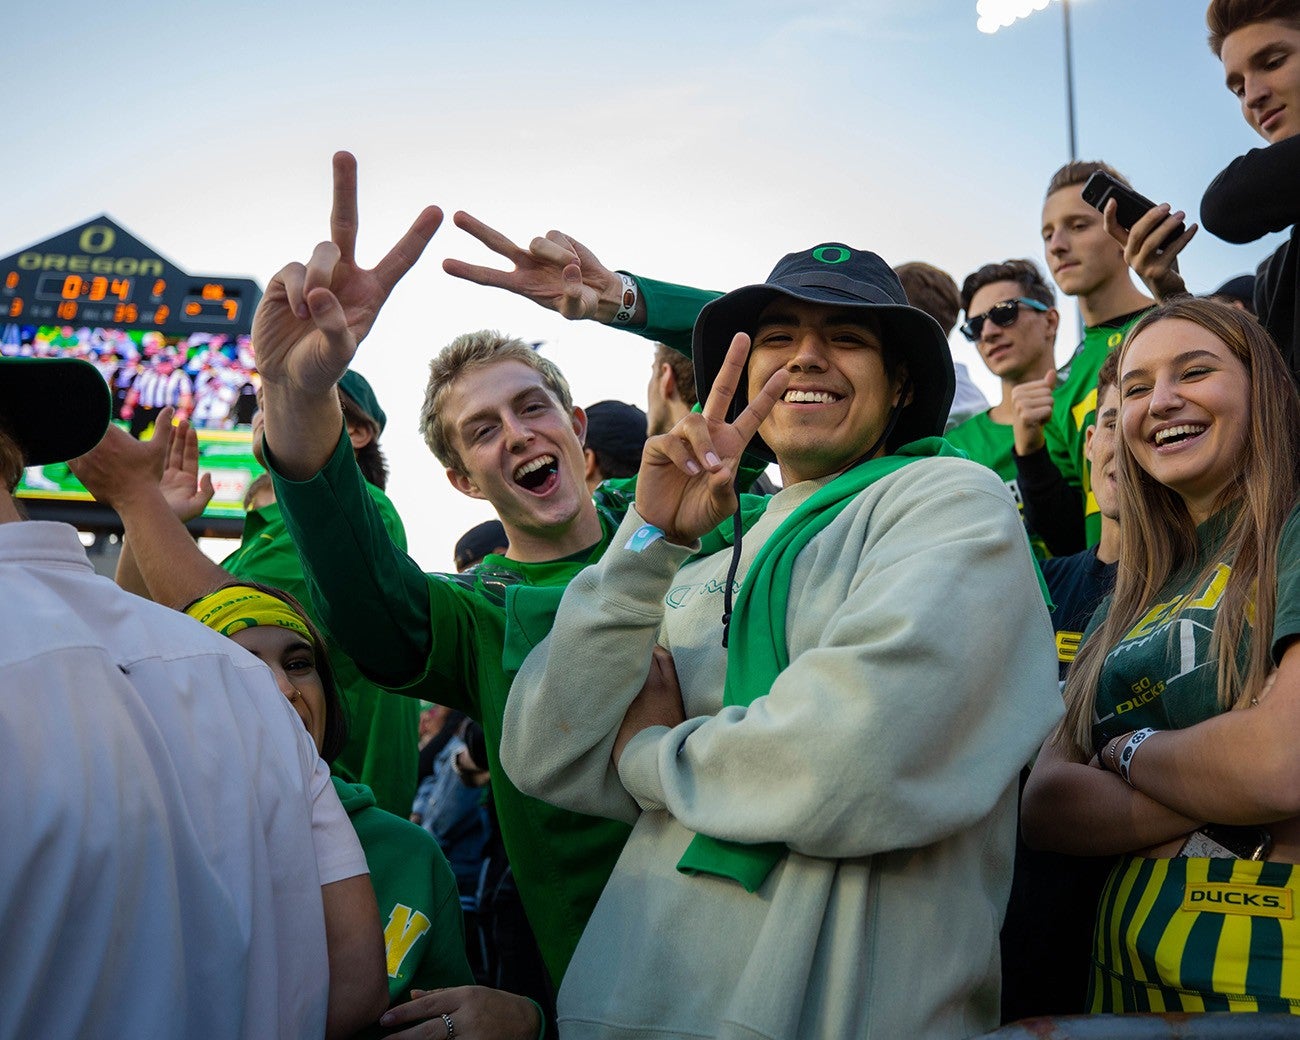 Students in Autzen Stadium stands making victory signs with fingers.